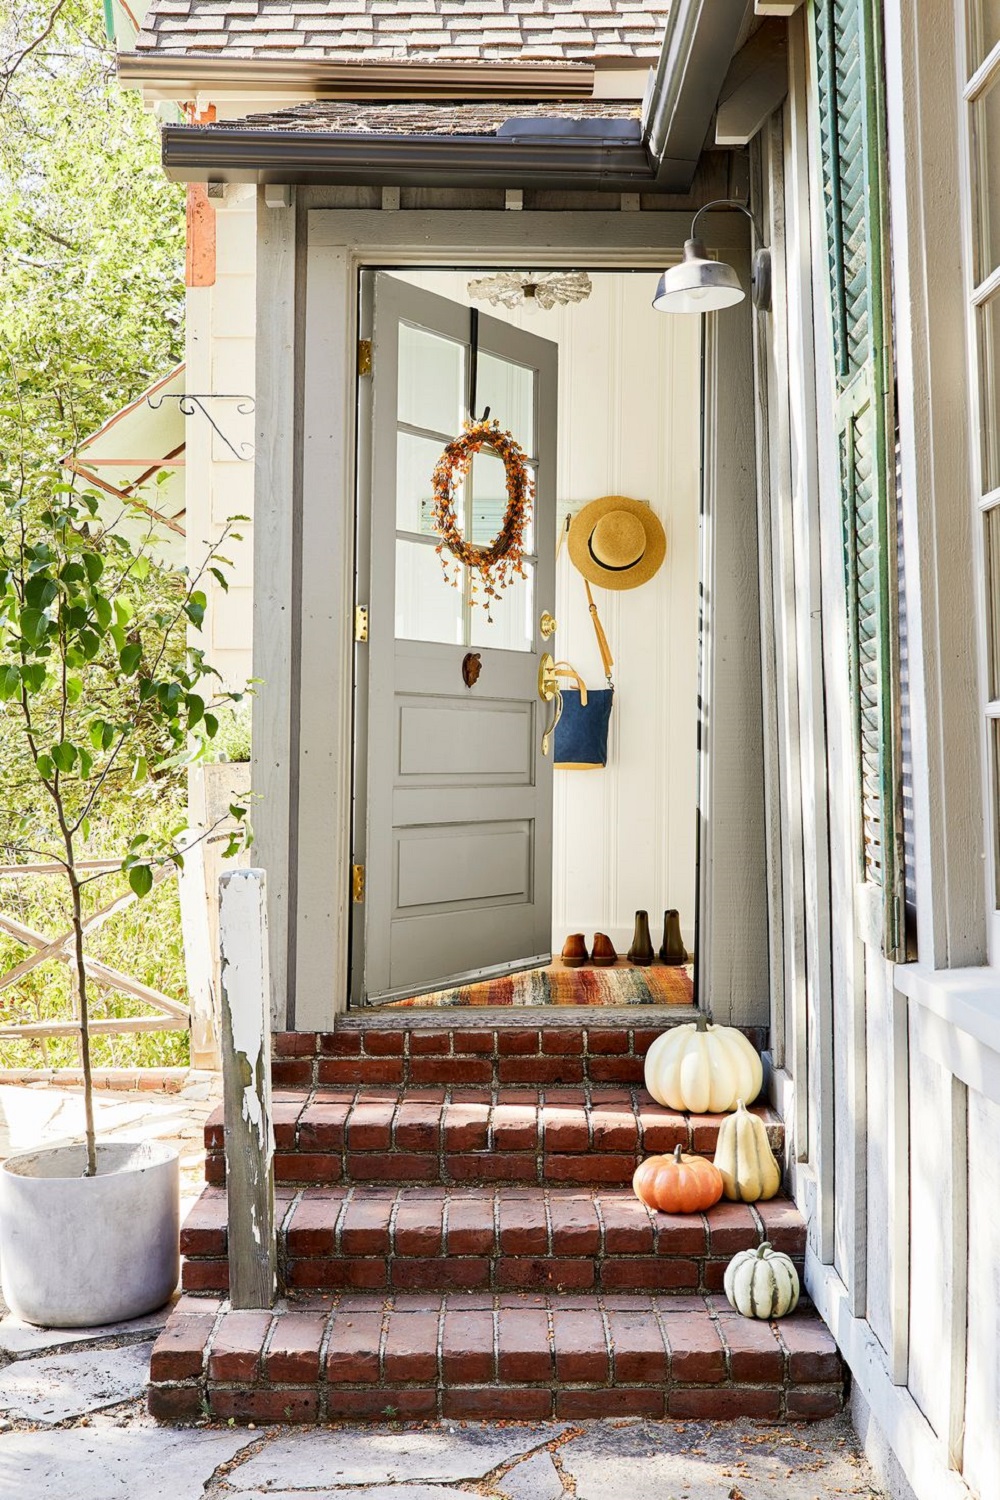 t3-57 Thanksgiving decorating ideas that will make your home look great